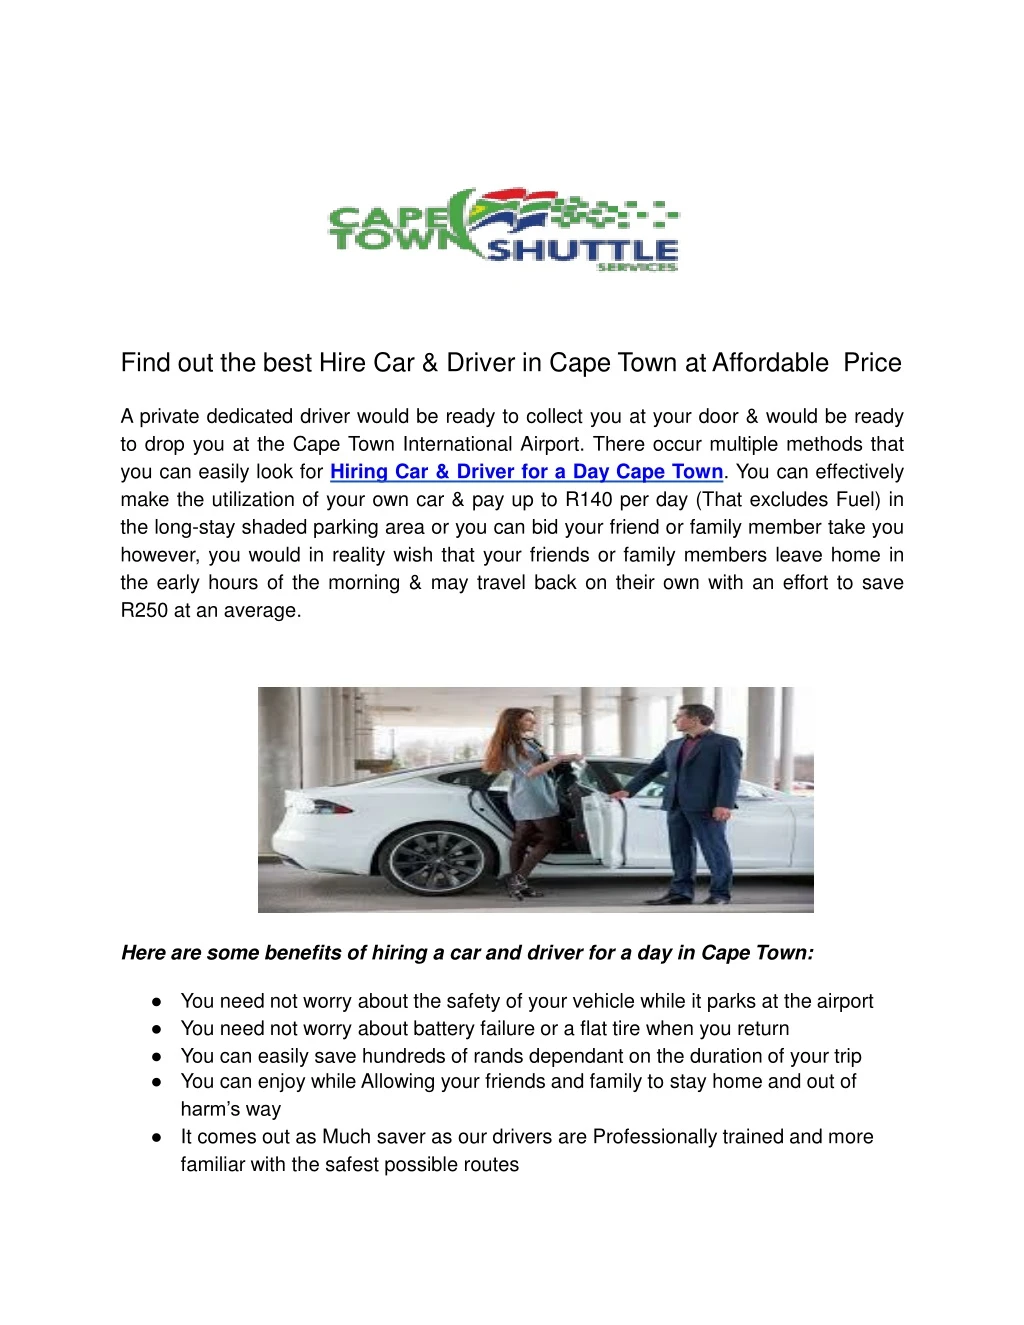 find out the best hire car driver in cape town